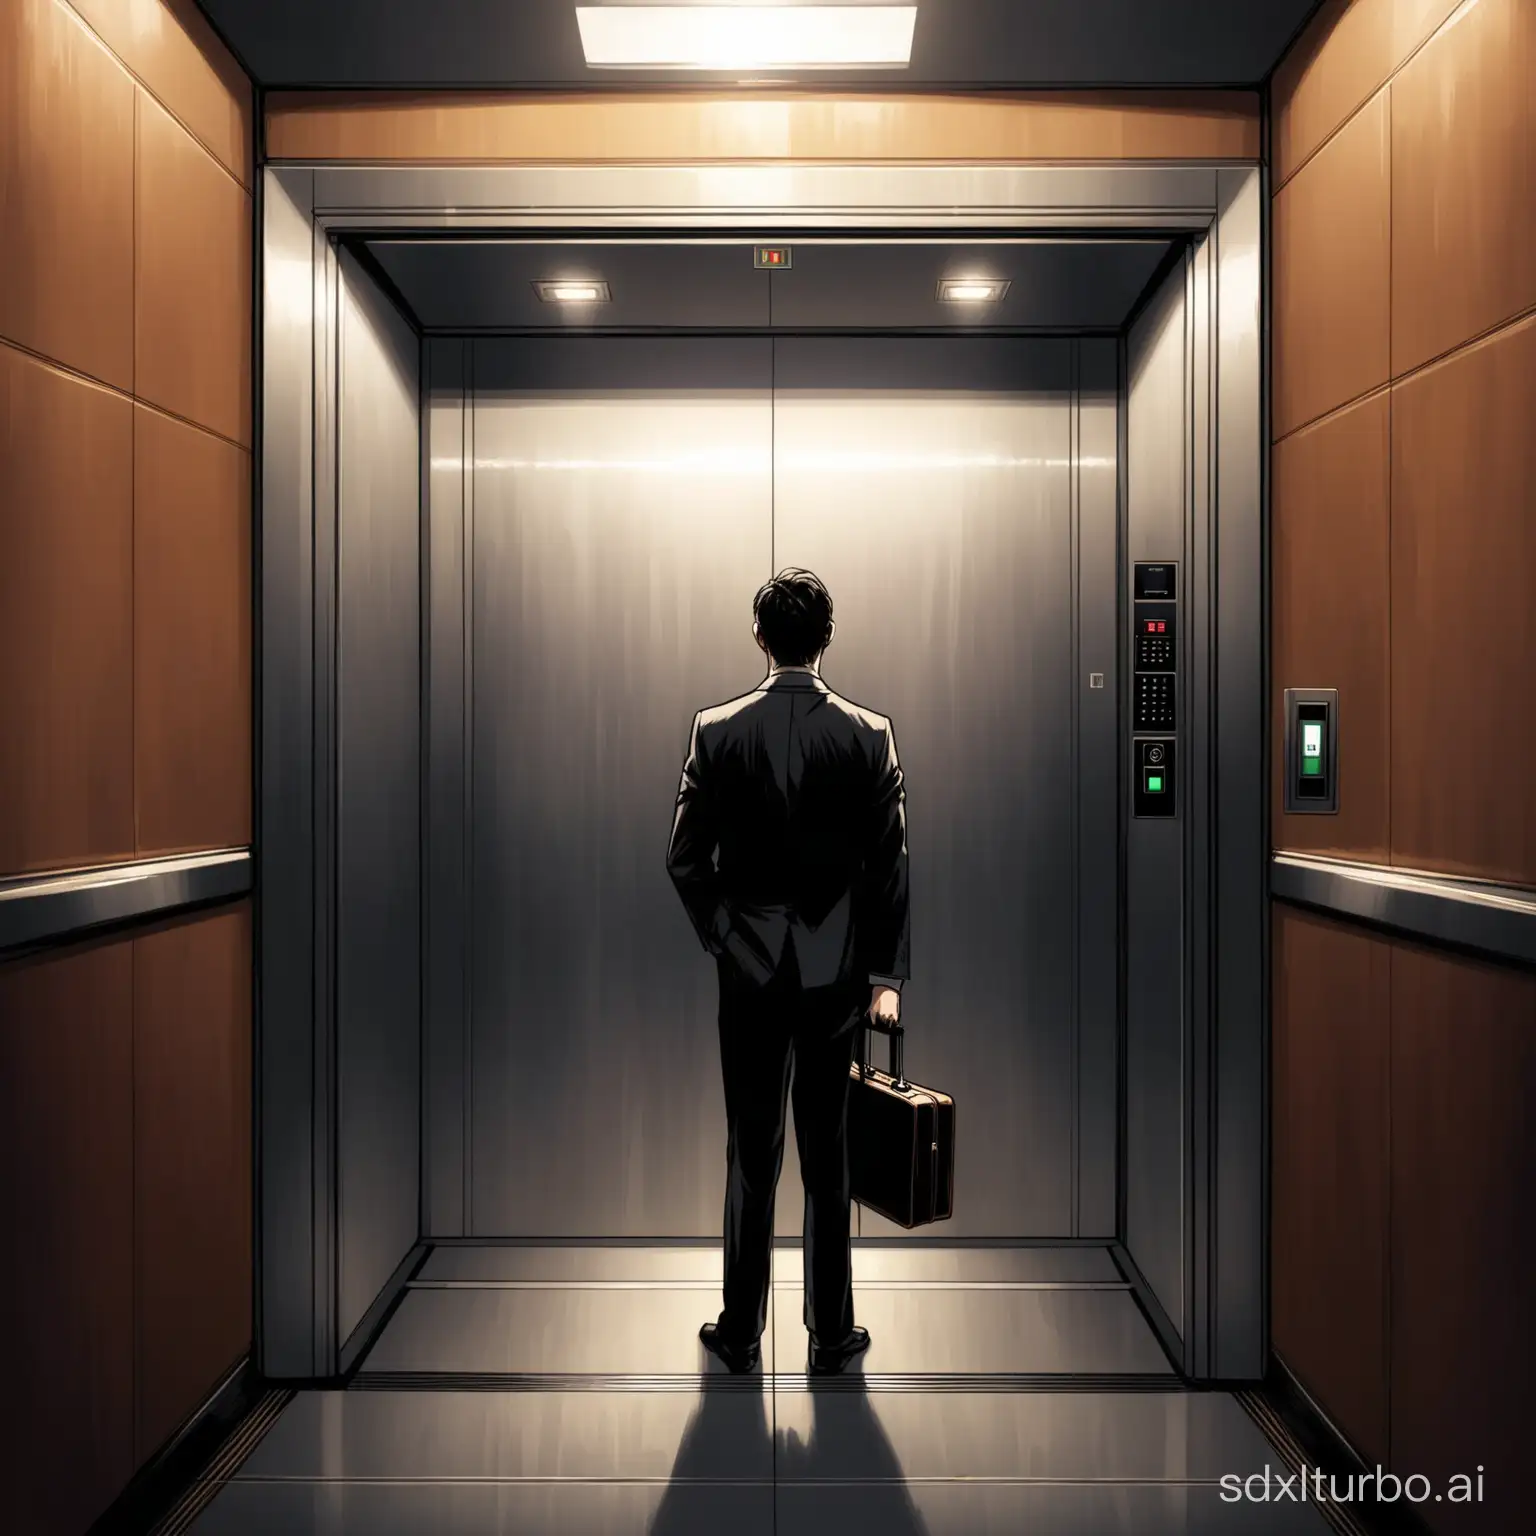 Inside the elevator, there were two people. A man with a briefcase looked at the elevator door in horror.